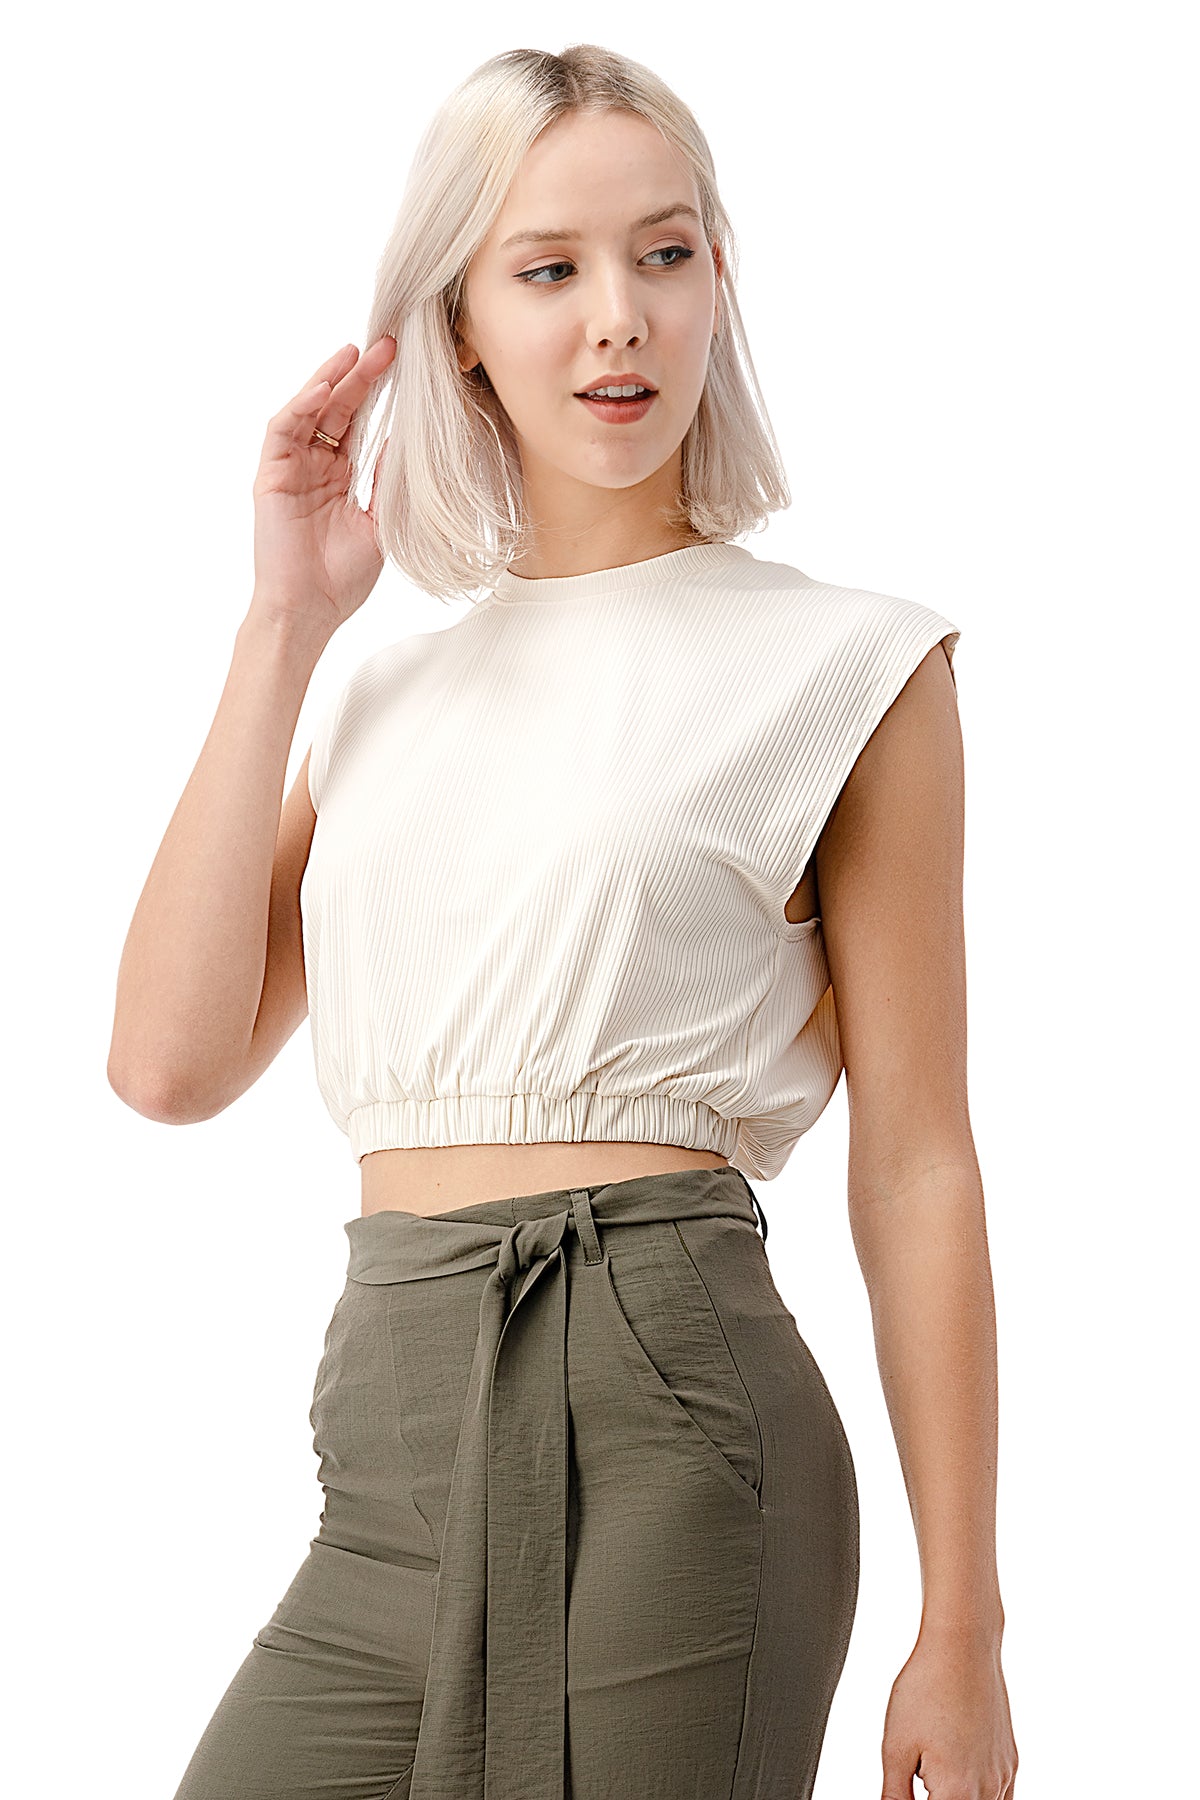 EDGY Land Girl's and Women's Crew Neck Sleeveless CroPPEd Trendy Top